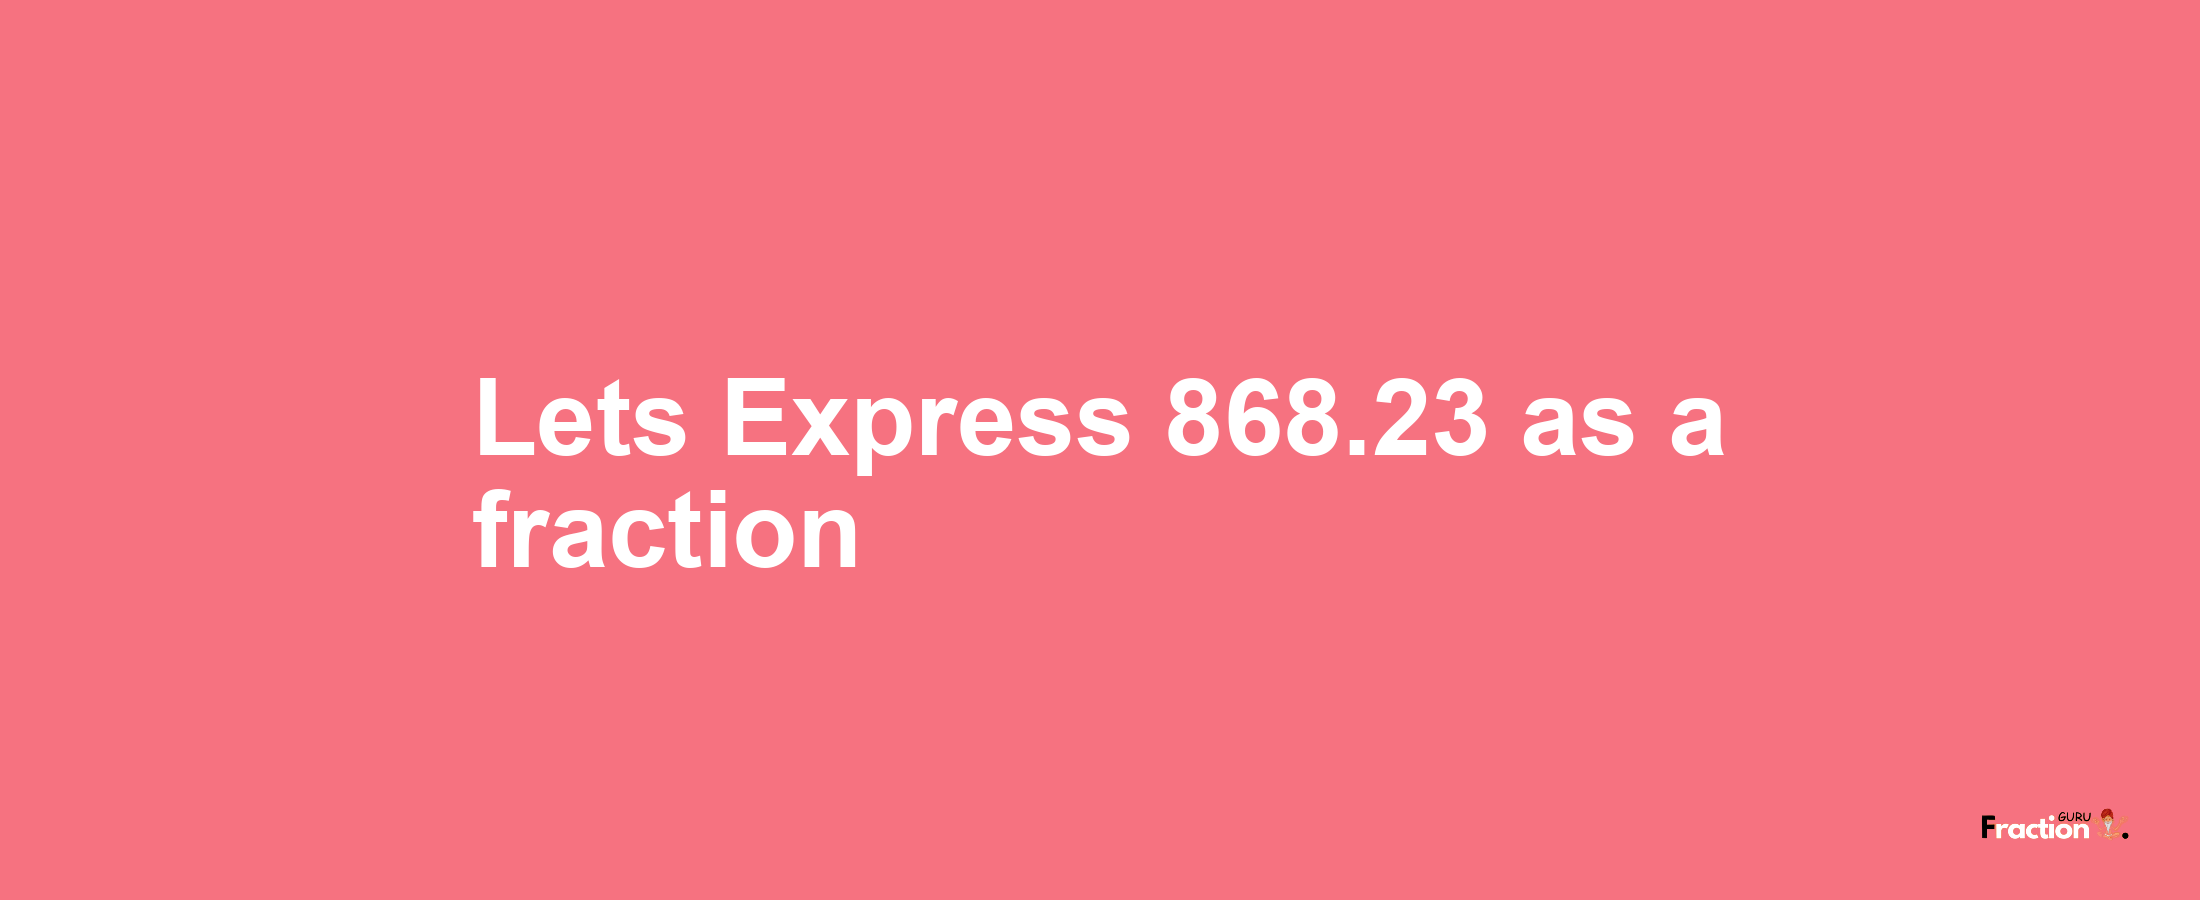 Lets Express 868.23 as afraction